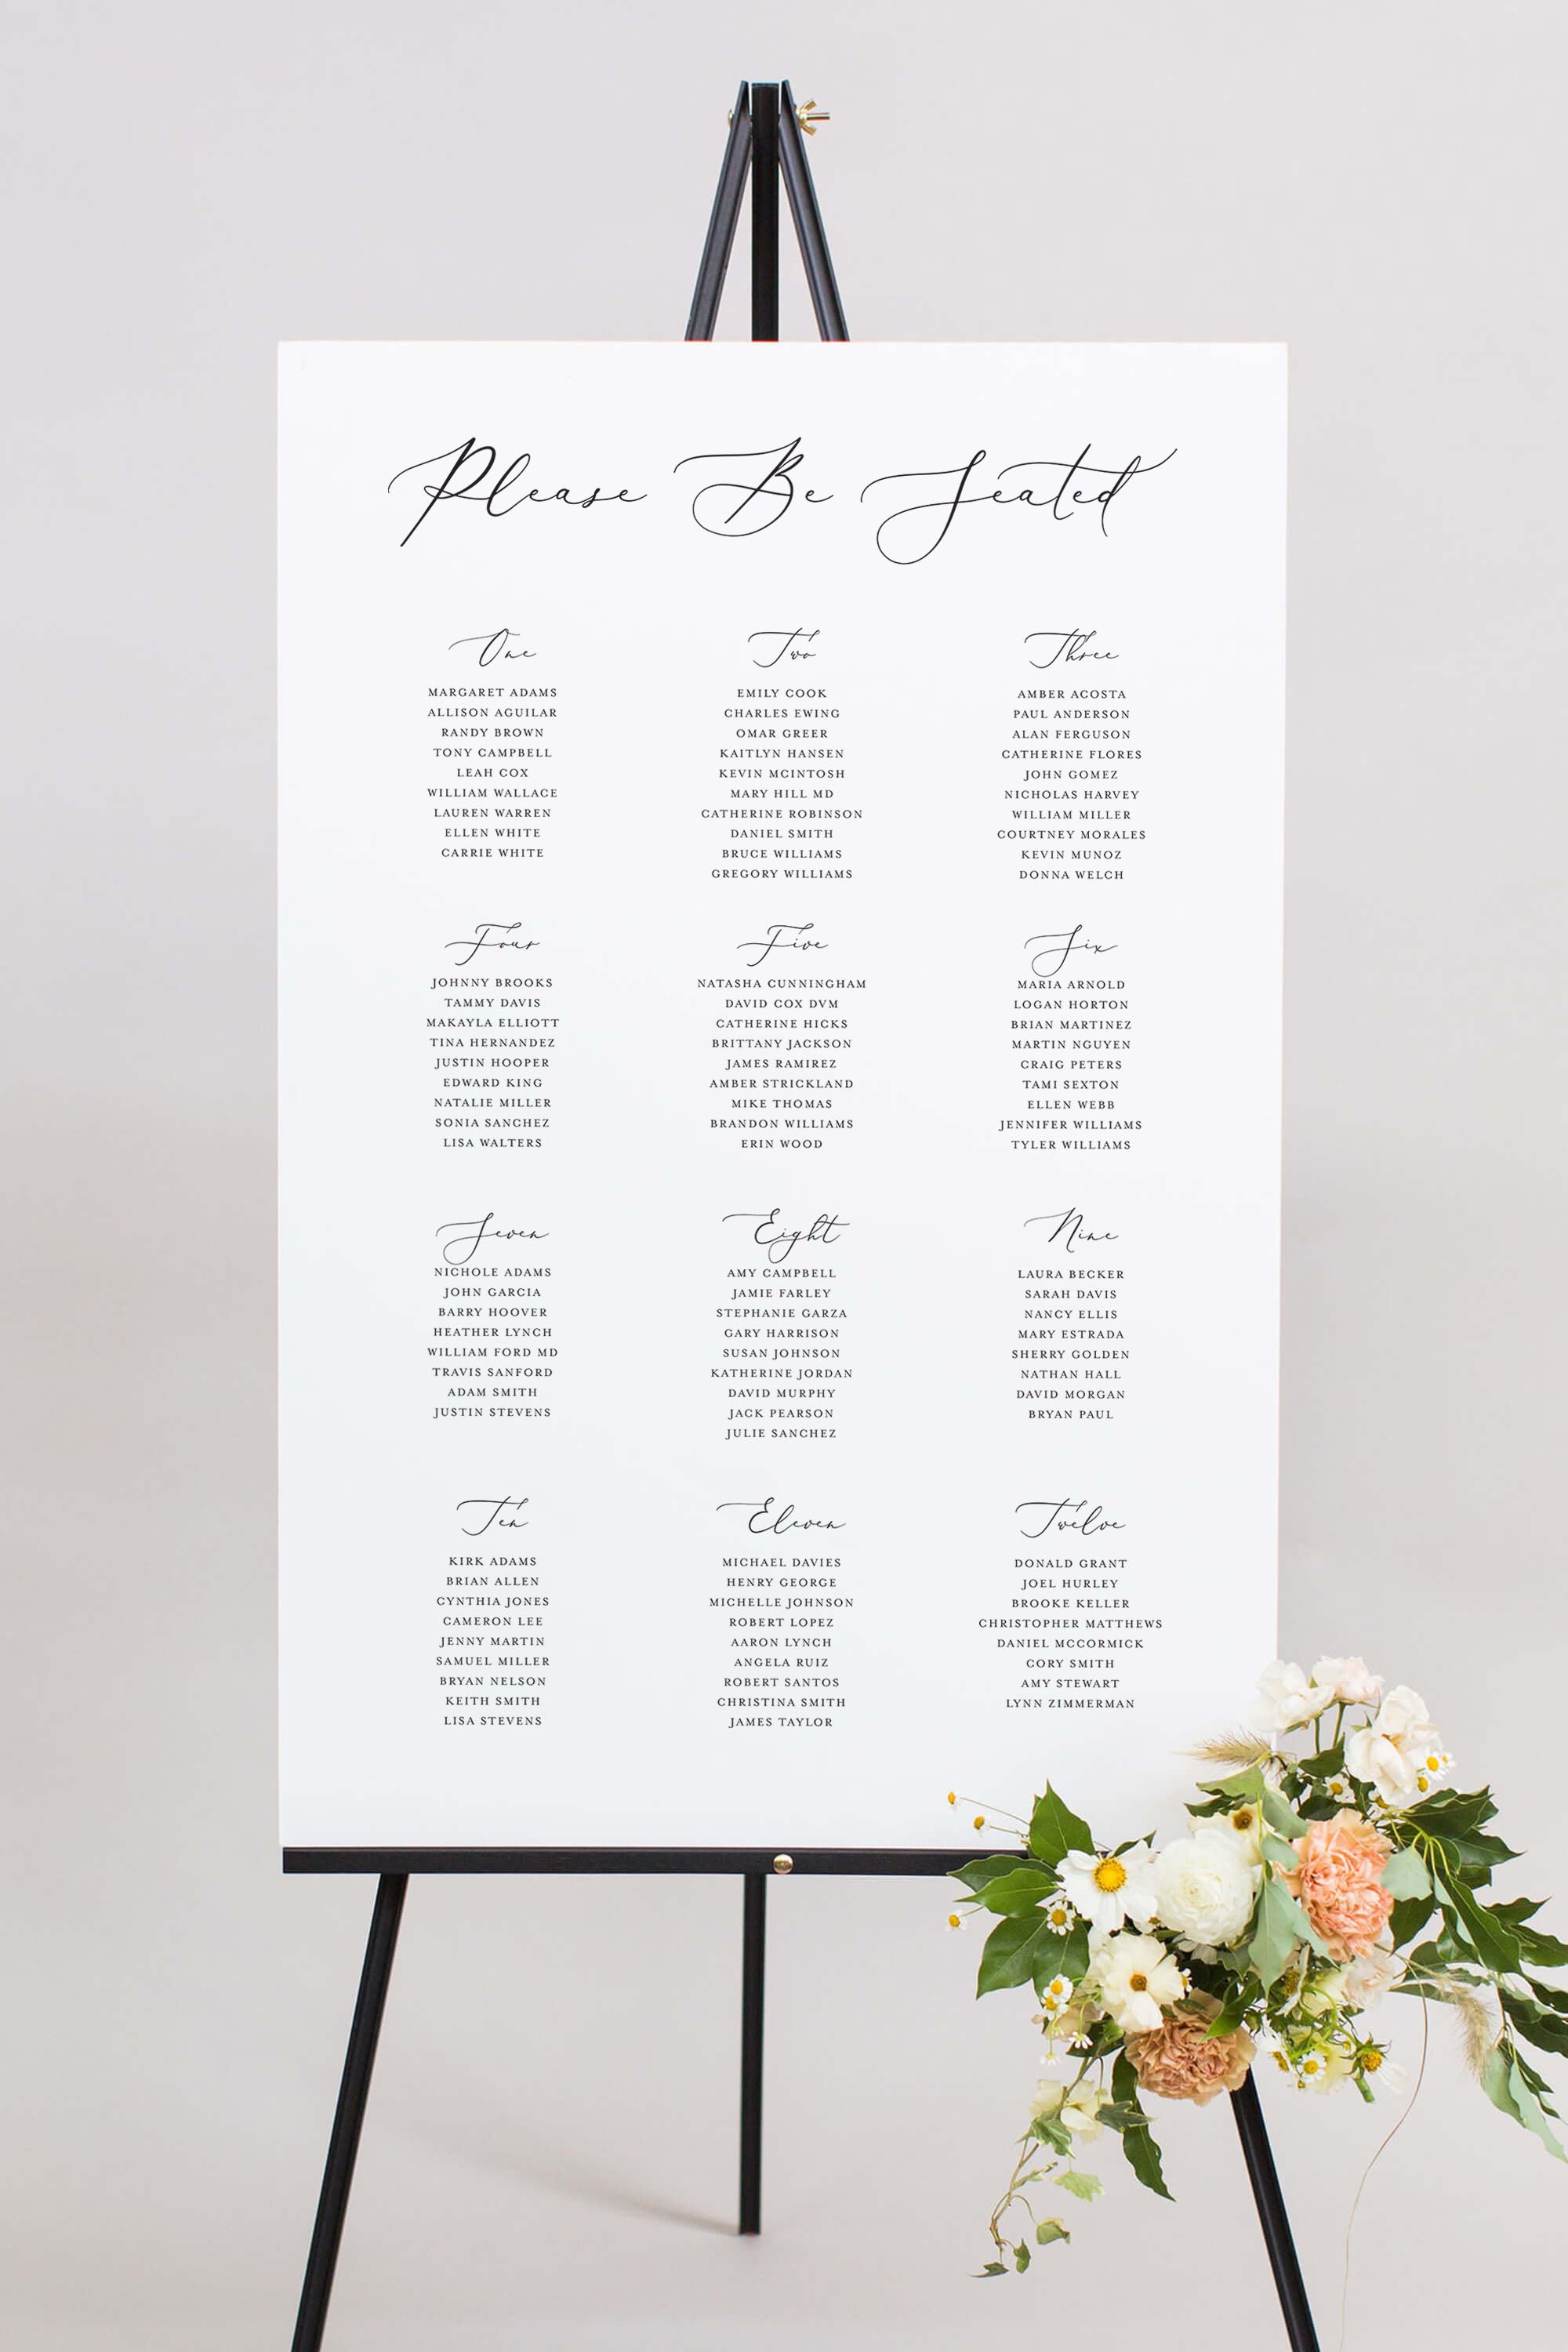 JennyGems Wedding Signs, Place Cards, Wedding Seating Chart Board For  Reception, Wedding Decor, 12x10 Inches, You Can Find Your Seat Here But  Your Place Is on The Dance Floor, American Made (White) 